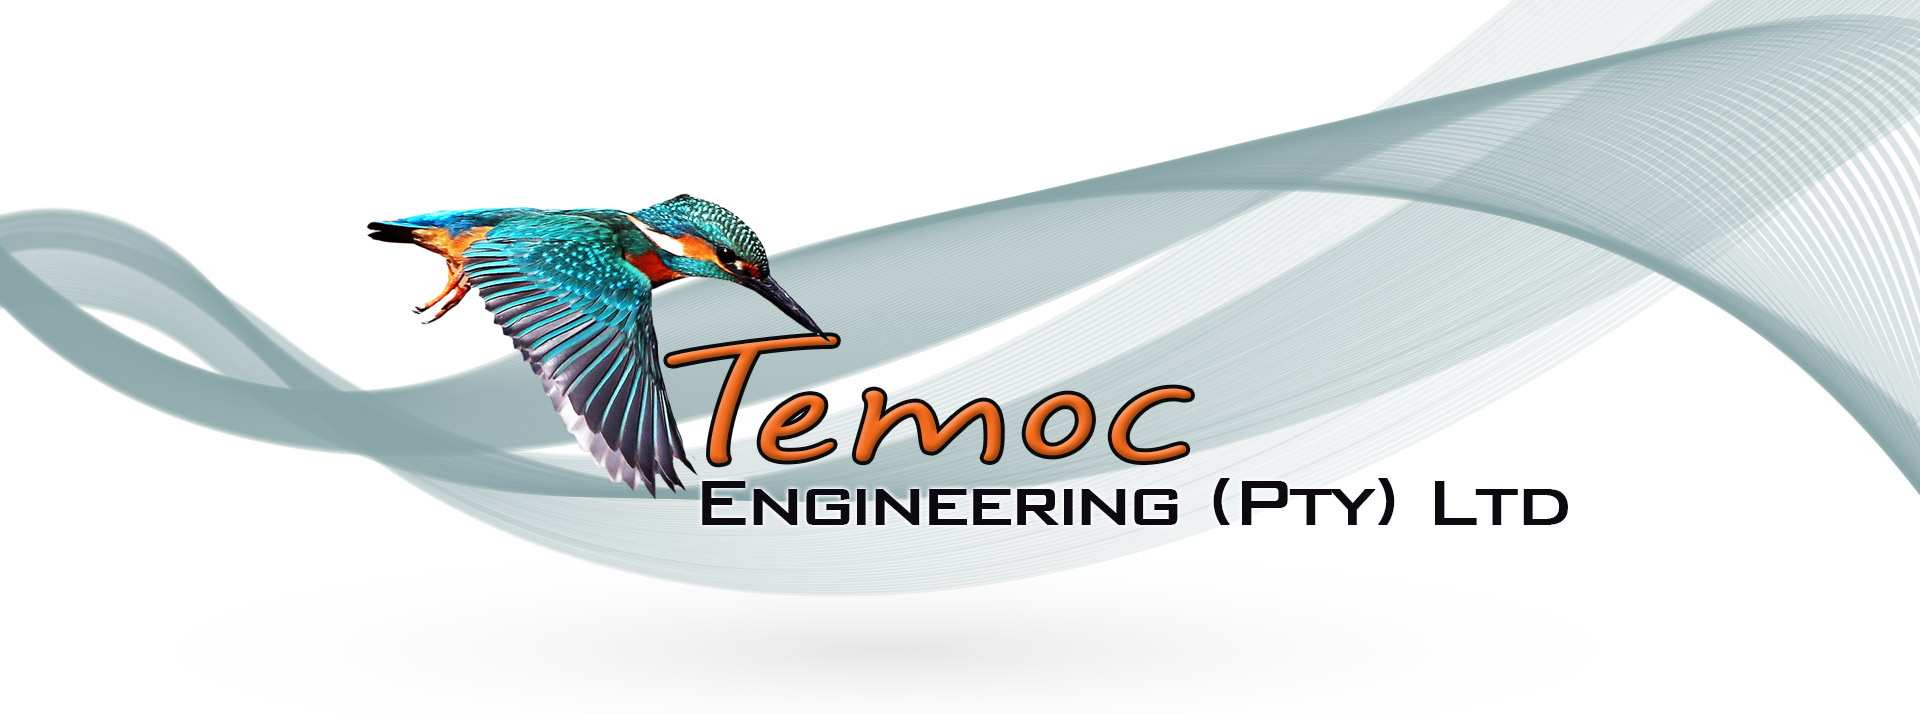 images/2017/home/temoc-engineering-homepage-banner-new.jpg